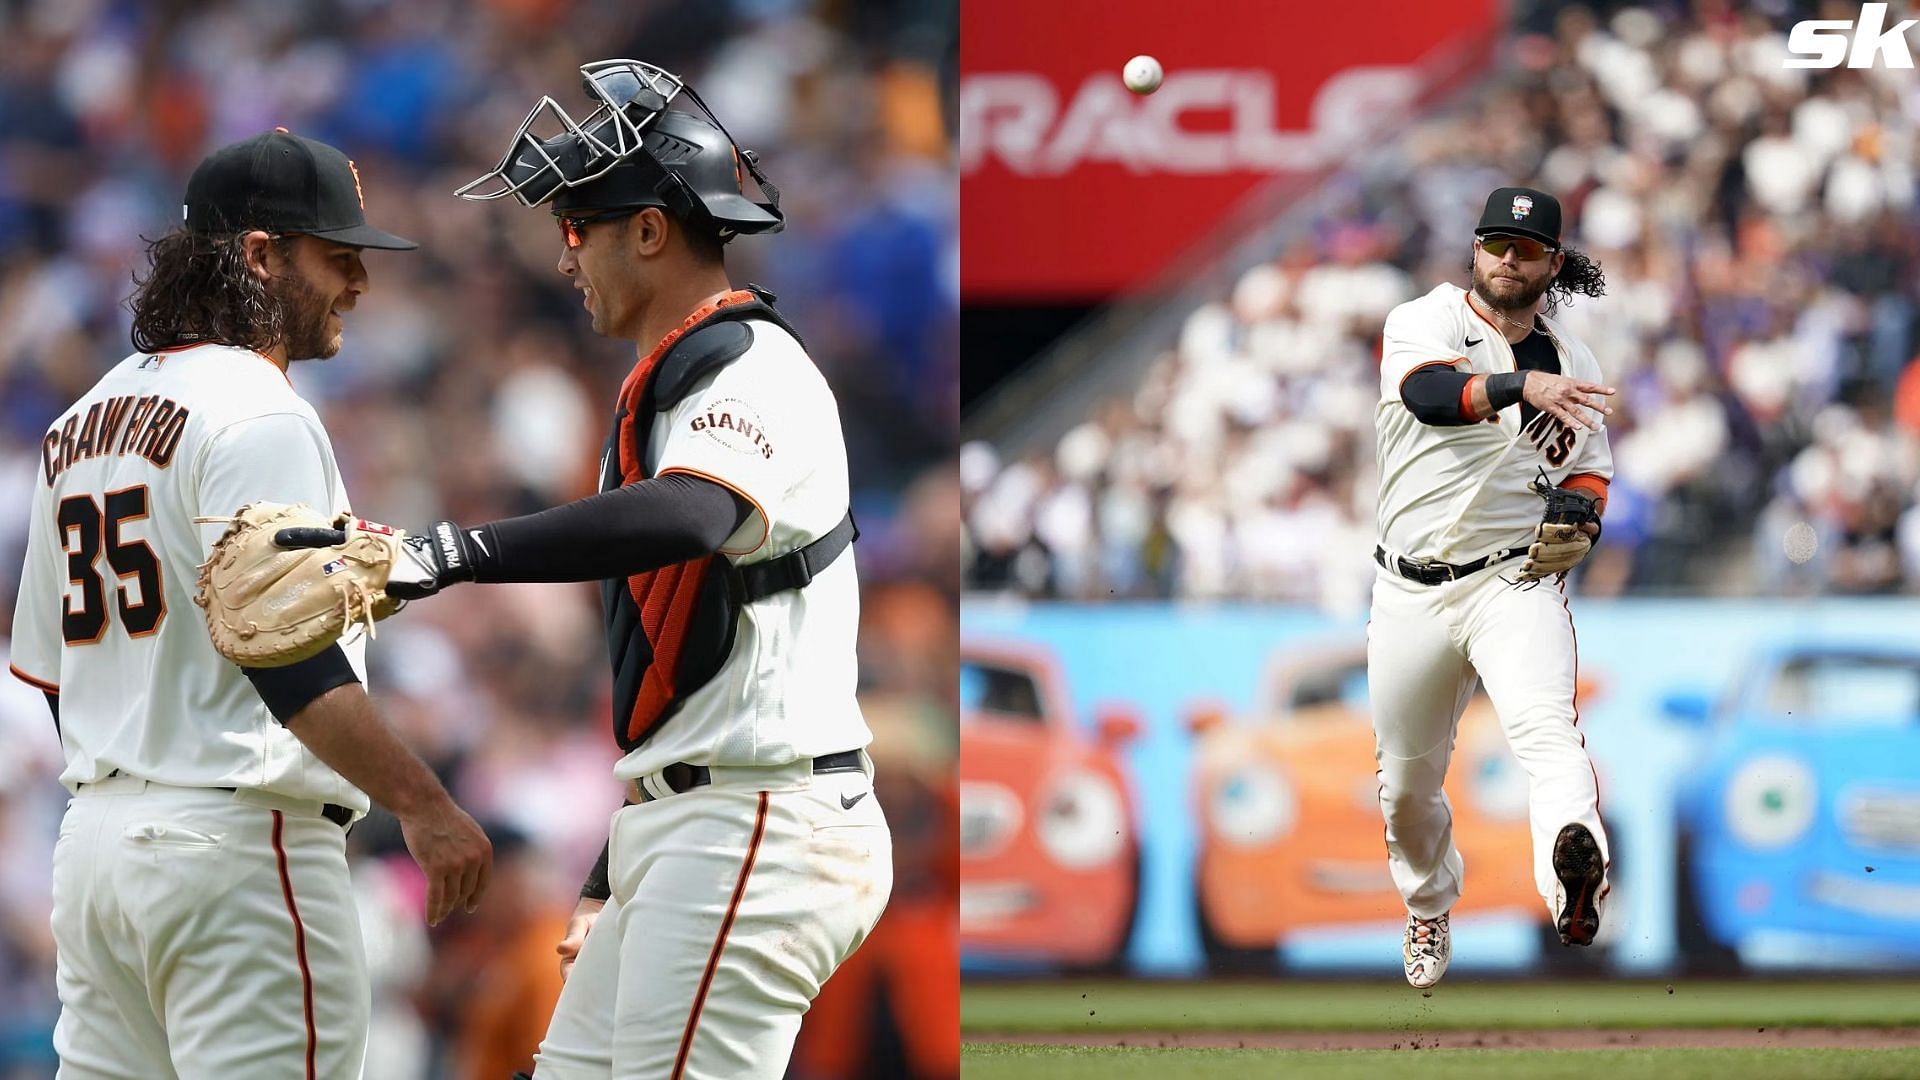 Brandon Crawford not 'thrilled about' new role as he tweaks swing